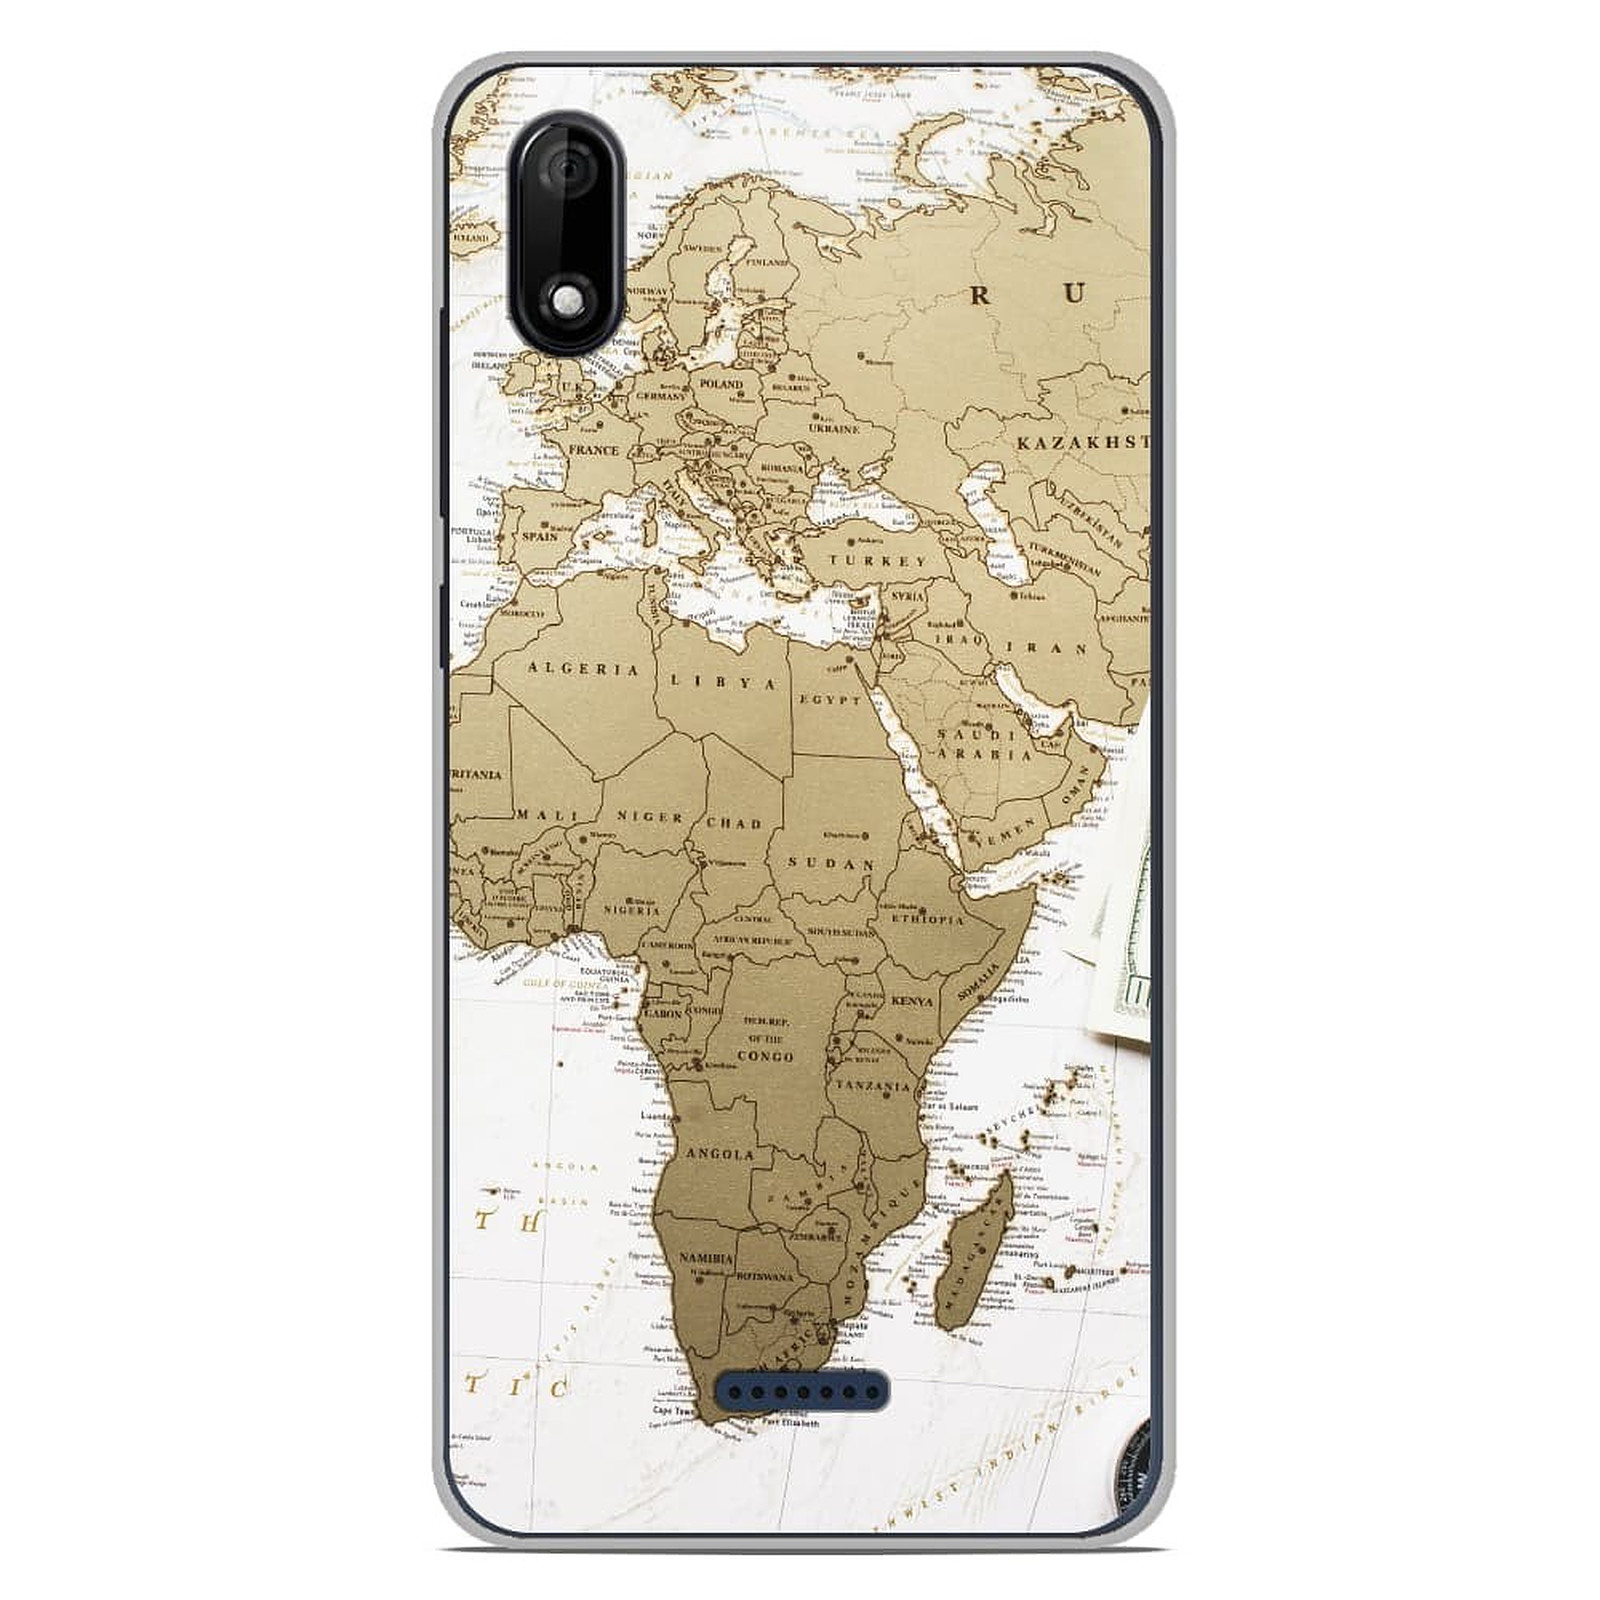 1001 Coques Coque silicone gel Wiko Y80 motif Map Europe Afrique - Coque telephone 1001Coques